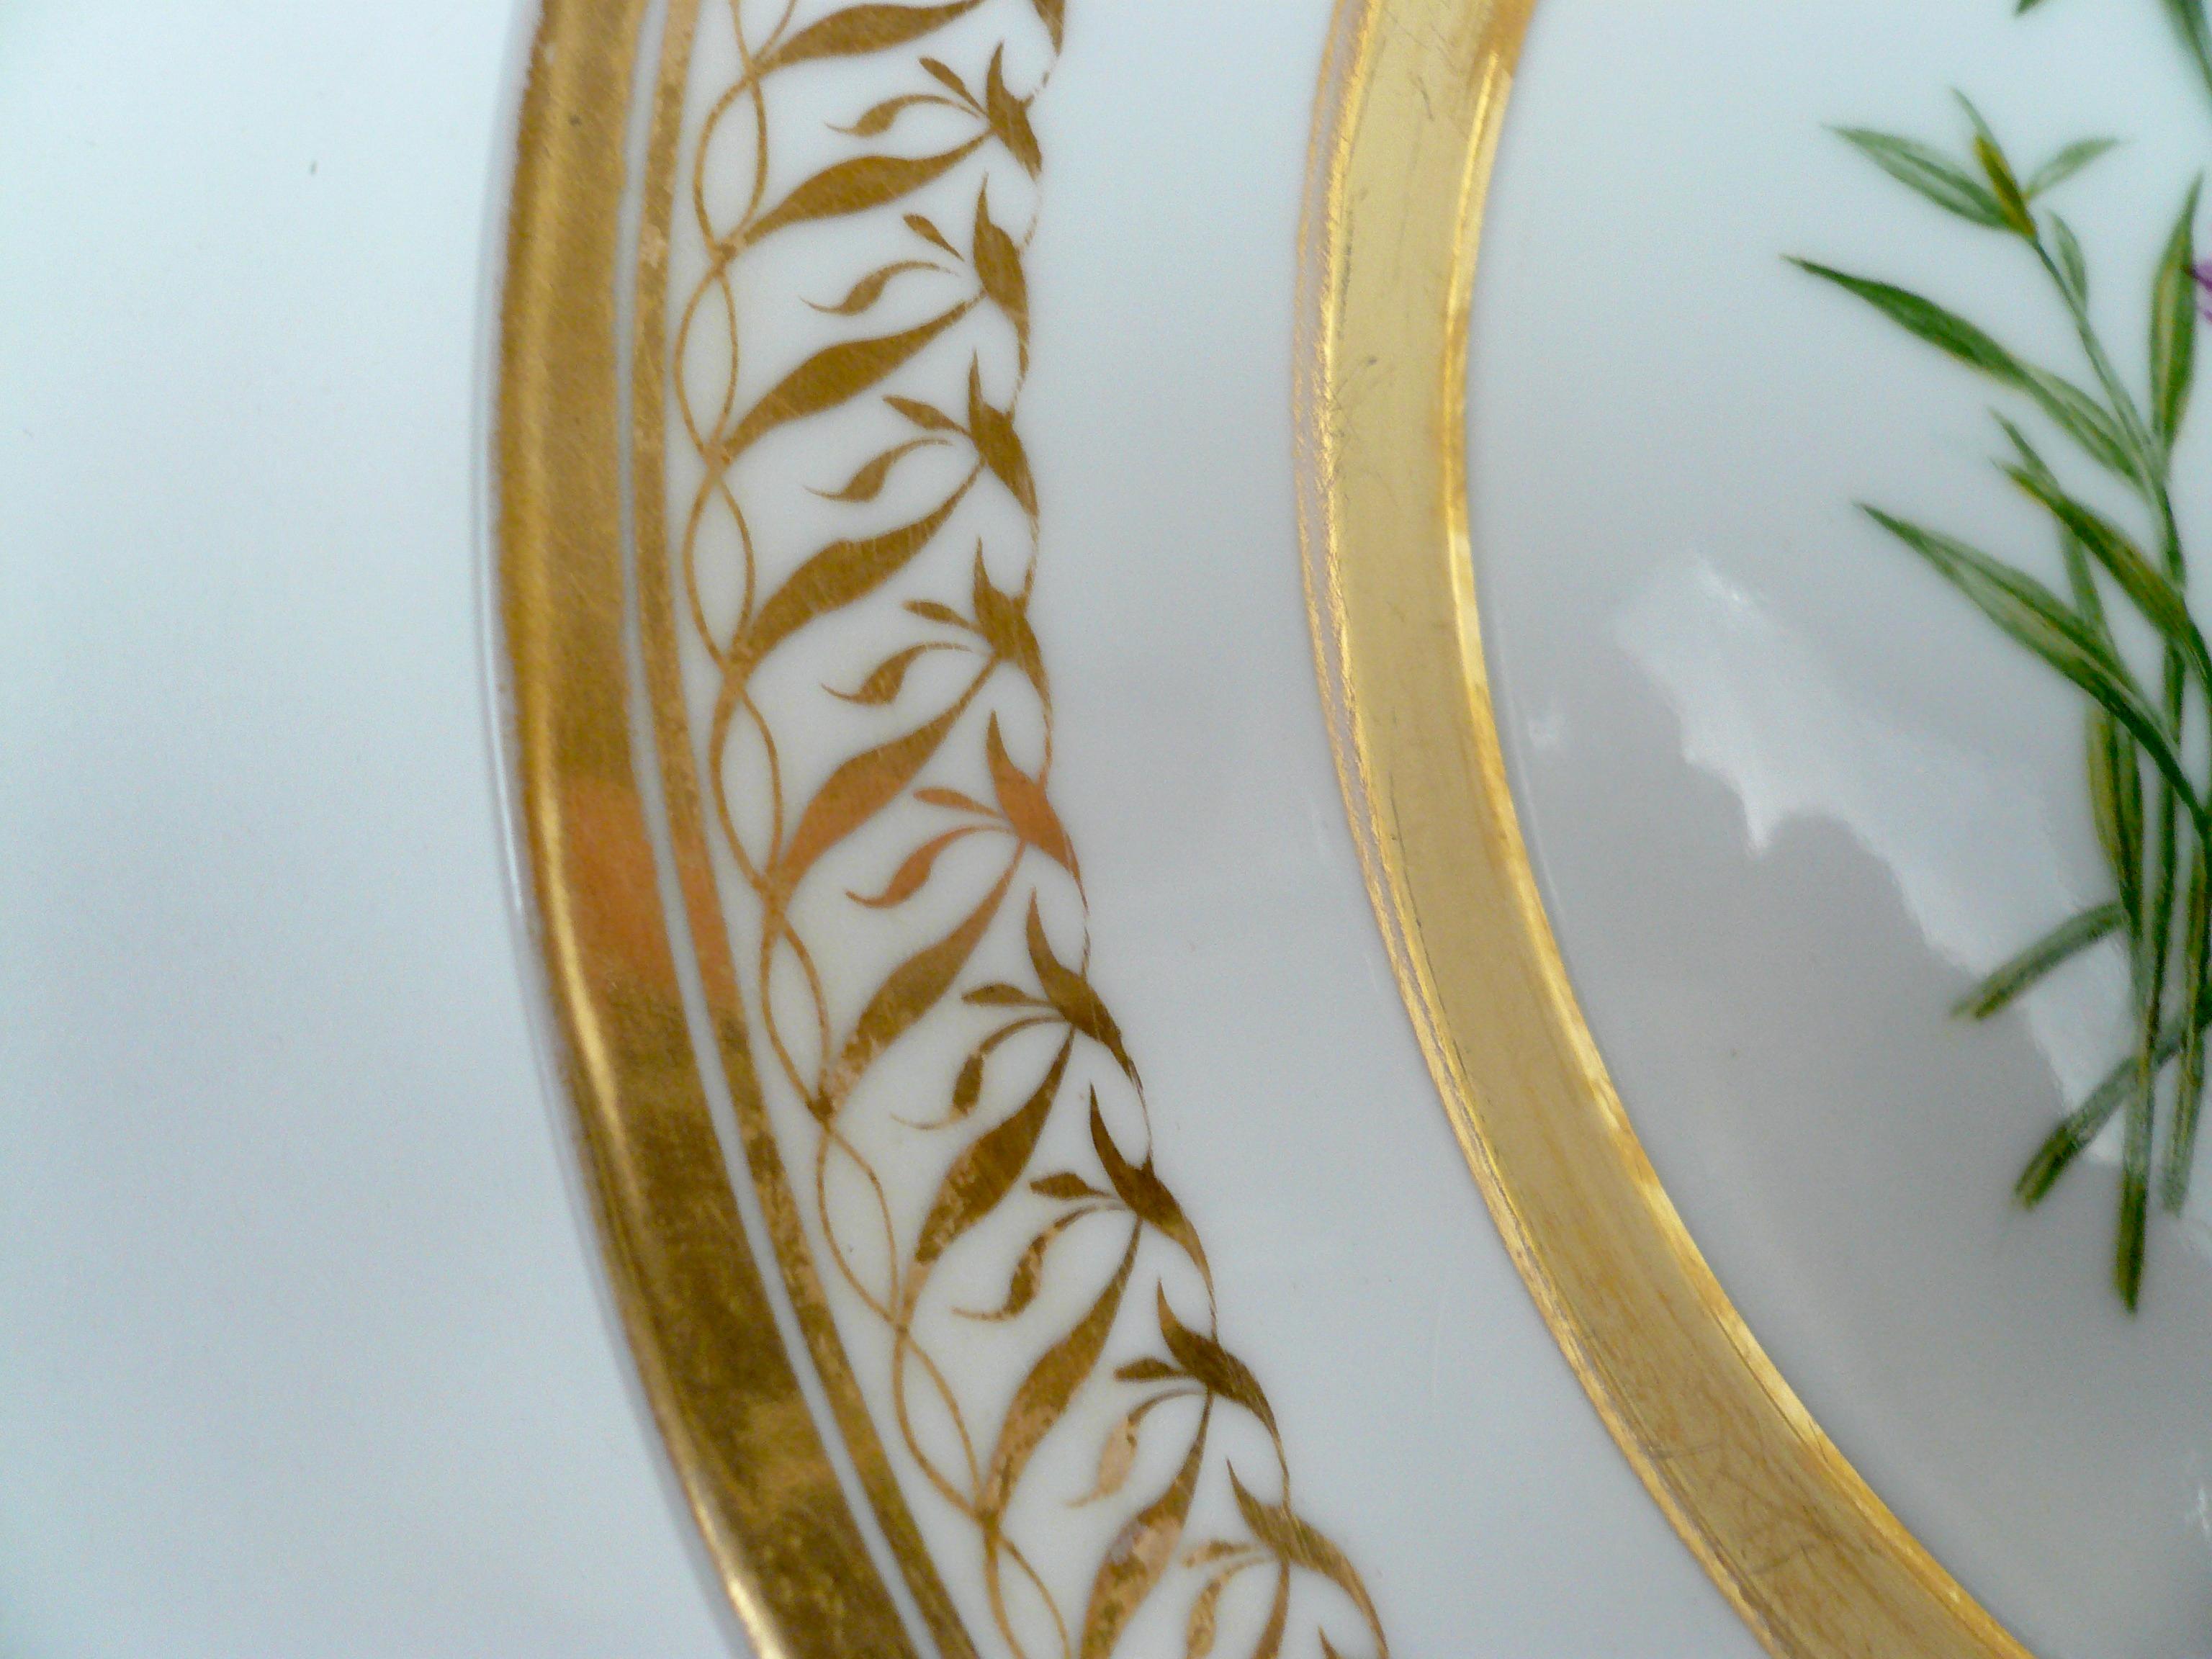 Neoclassical Berlin Porcelain Botanically Decorated Plate